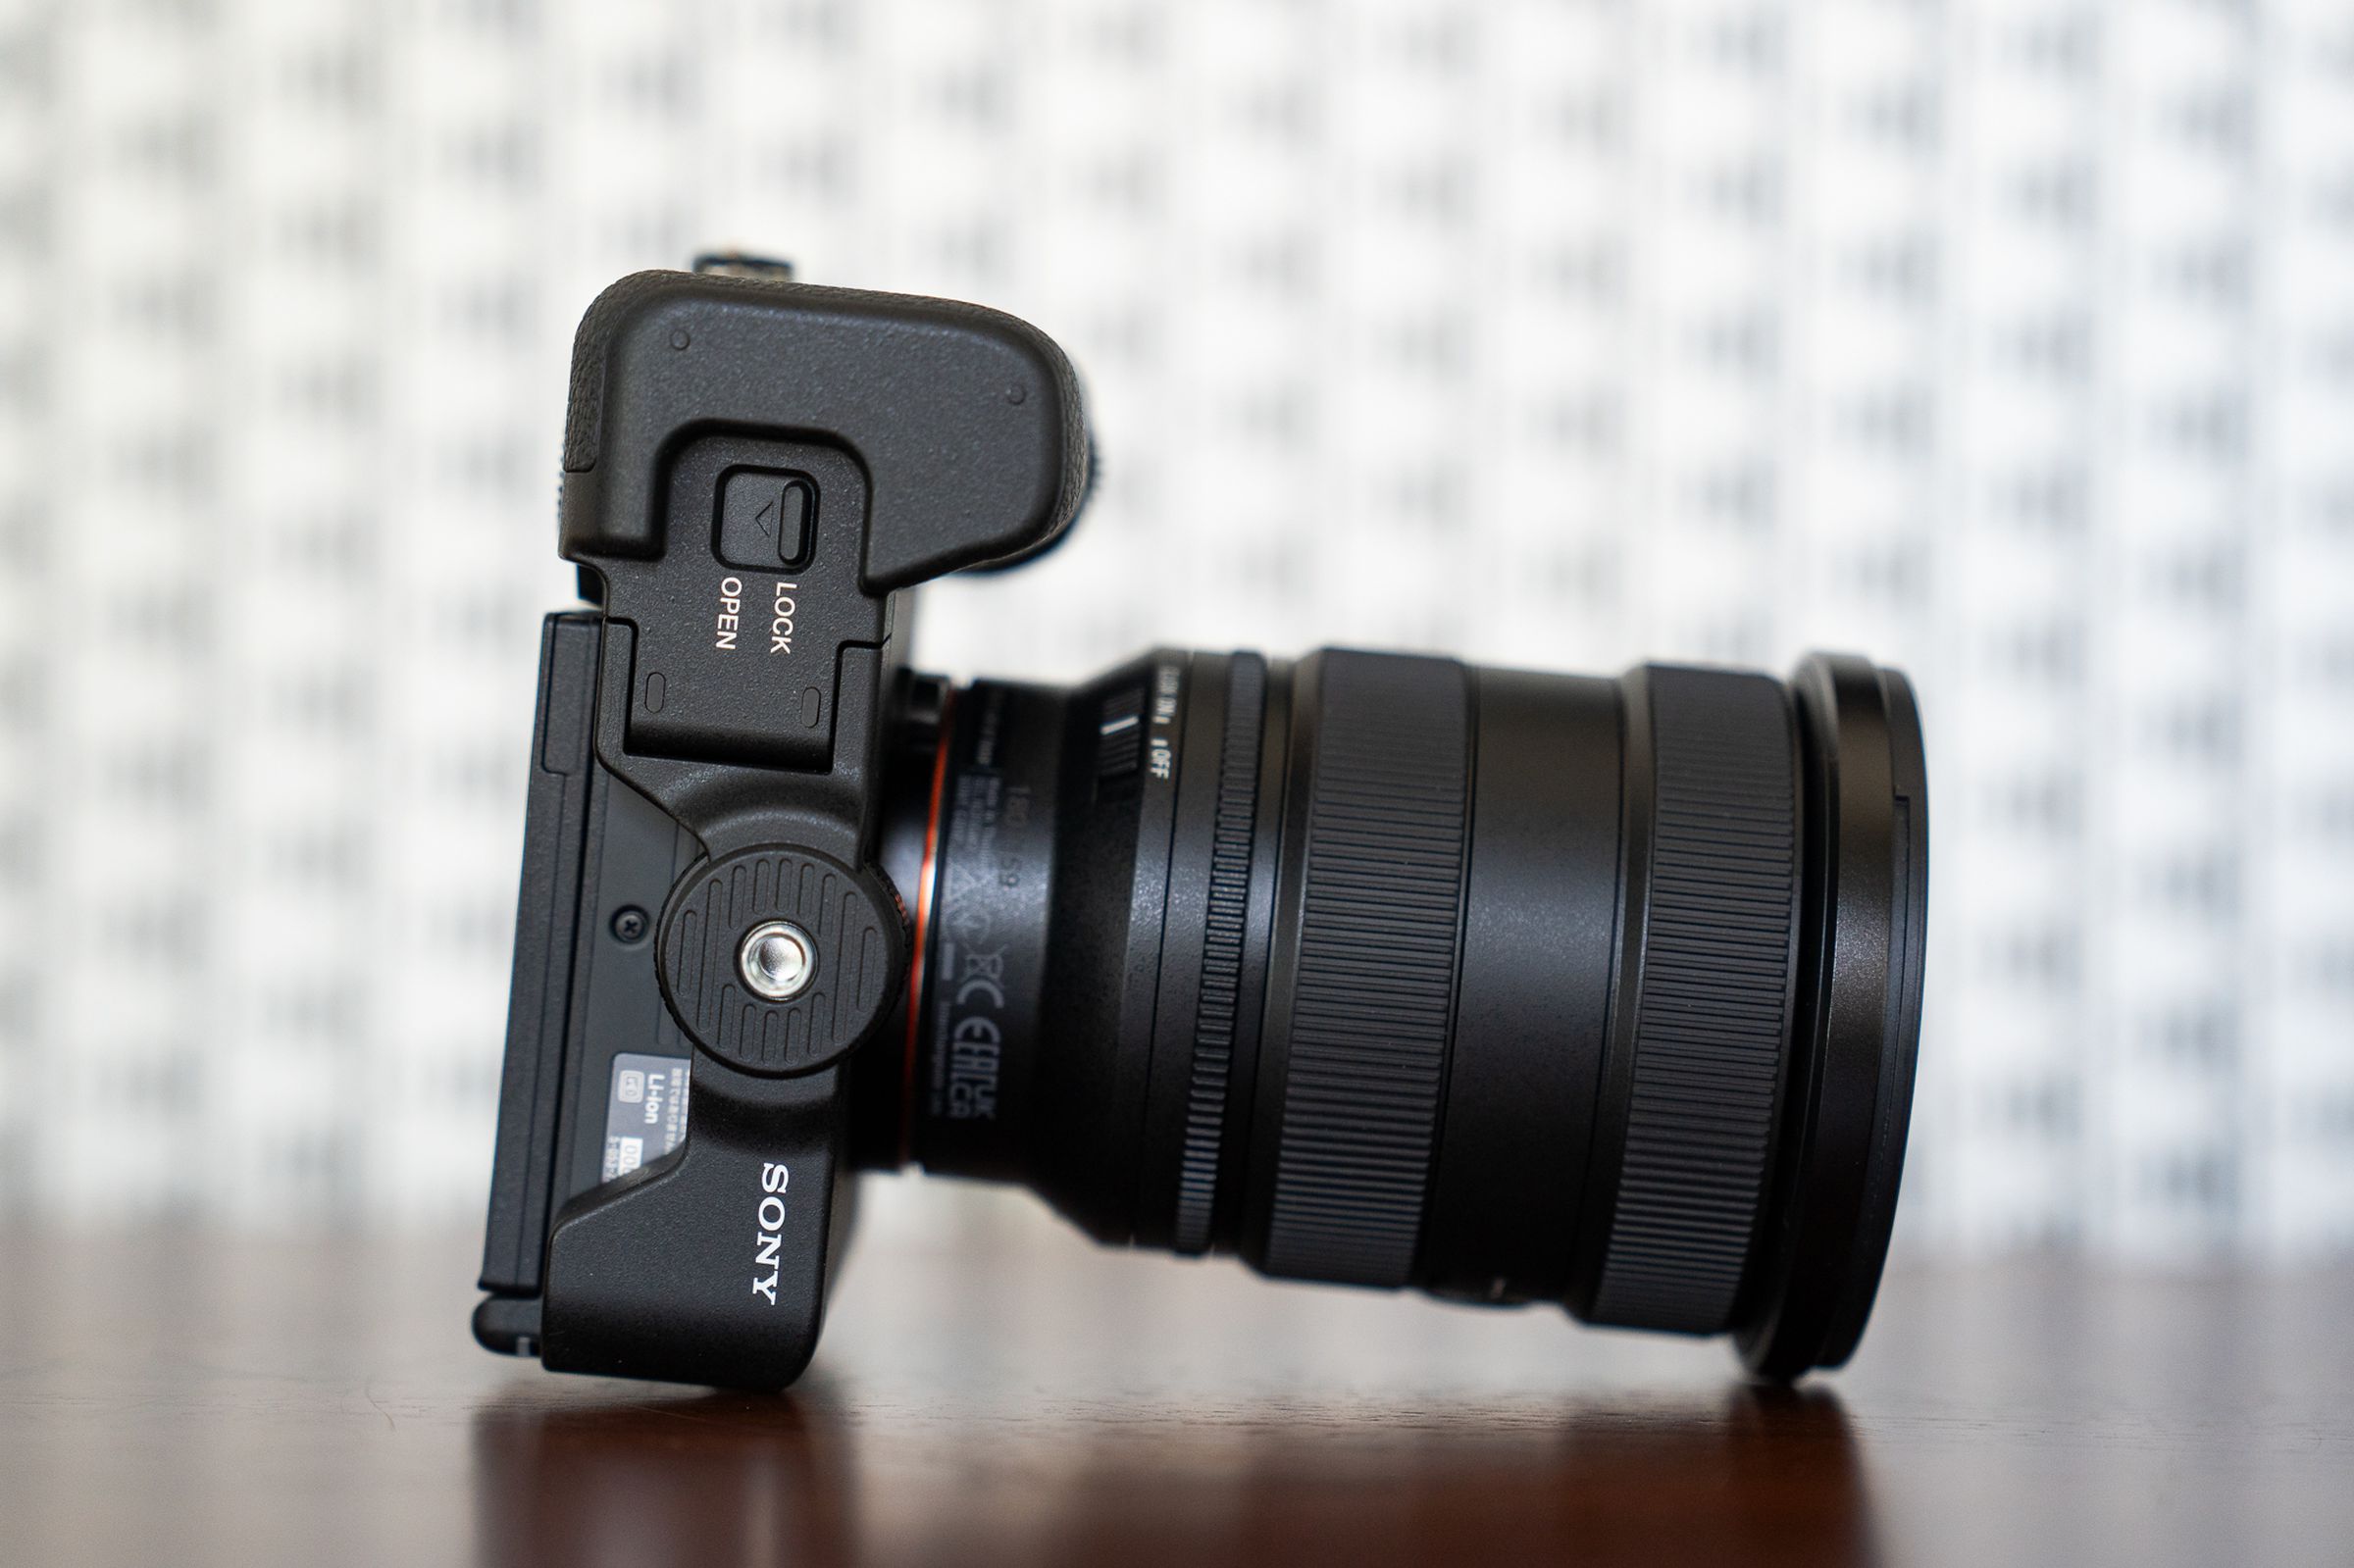 <em>I find the handgrip for the A7C R / A7C II both excellent and hilarious because when you flip that switch nearly half the grip swings open for battery access.</em>